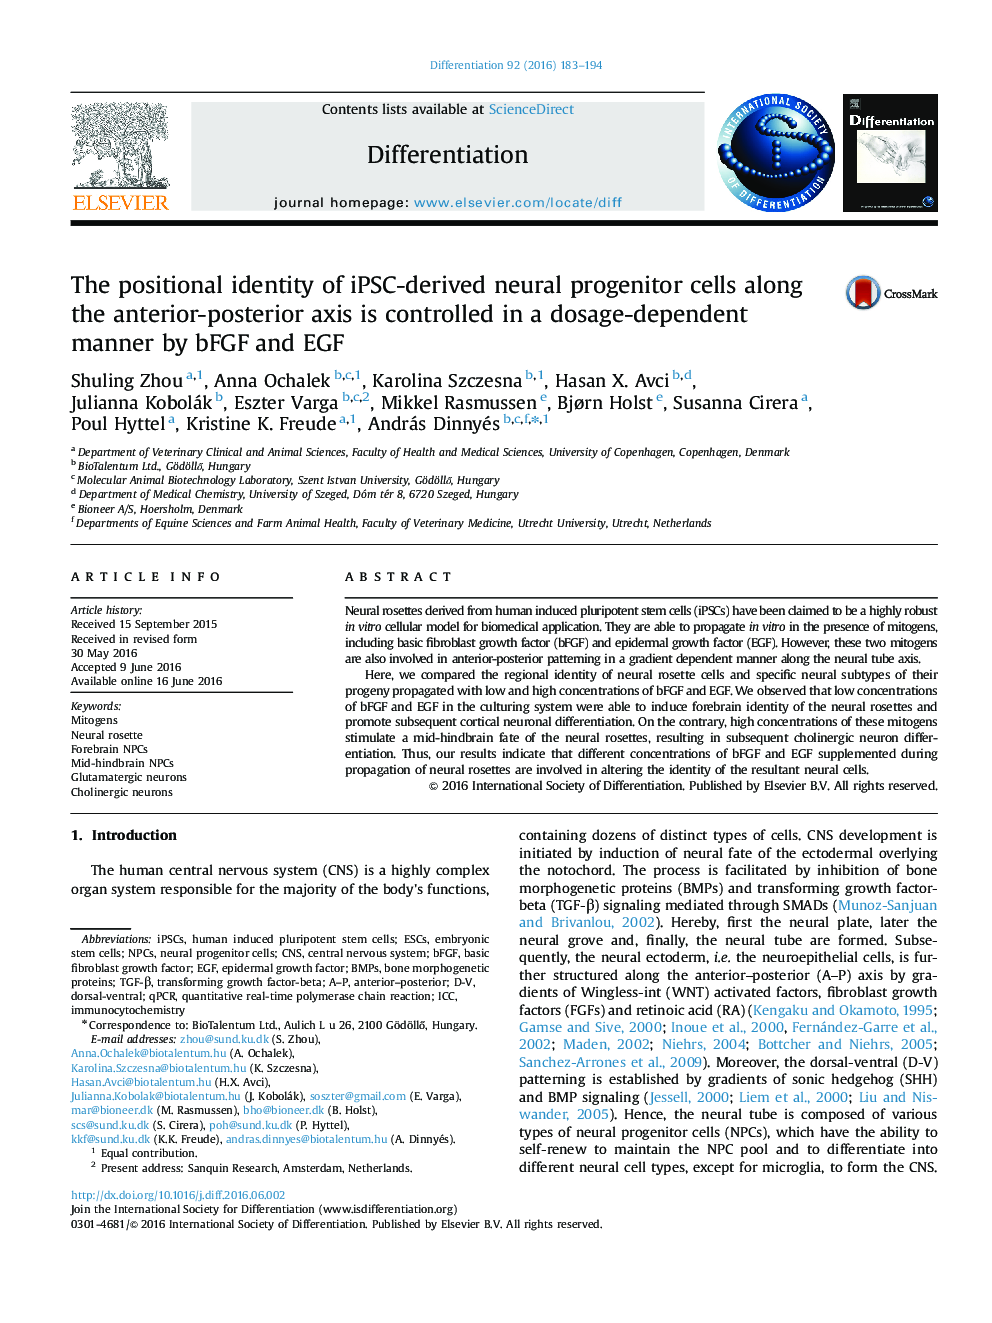 The positional identity of iPSC-derived neural progenitor cells along the anterior-posterior axis is controlled in a dosage-dependent manner by bFGF and EGF